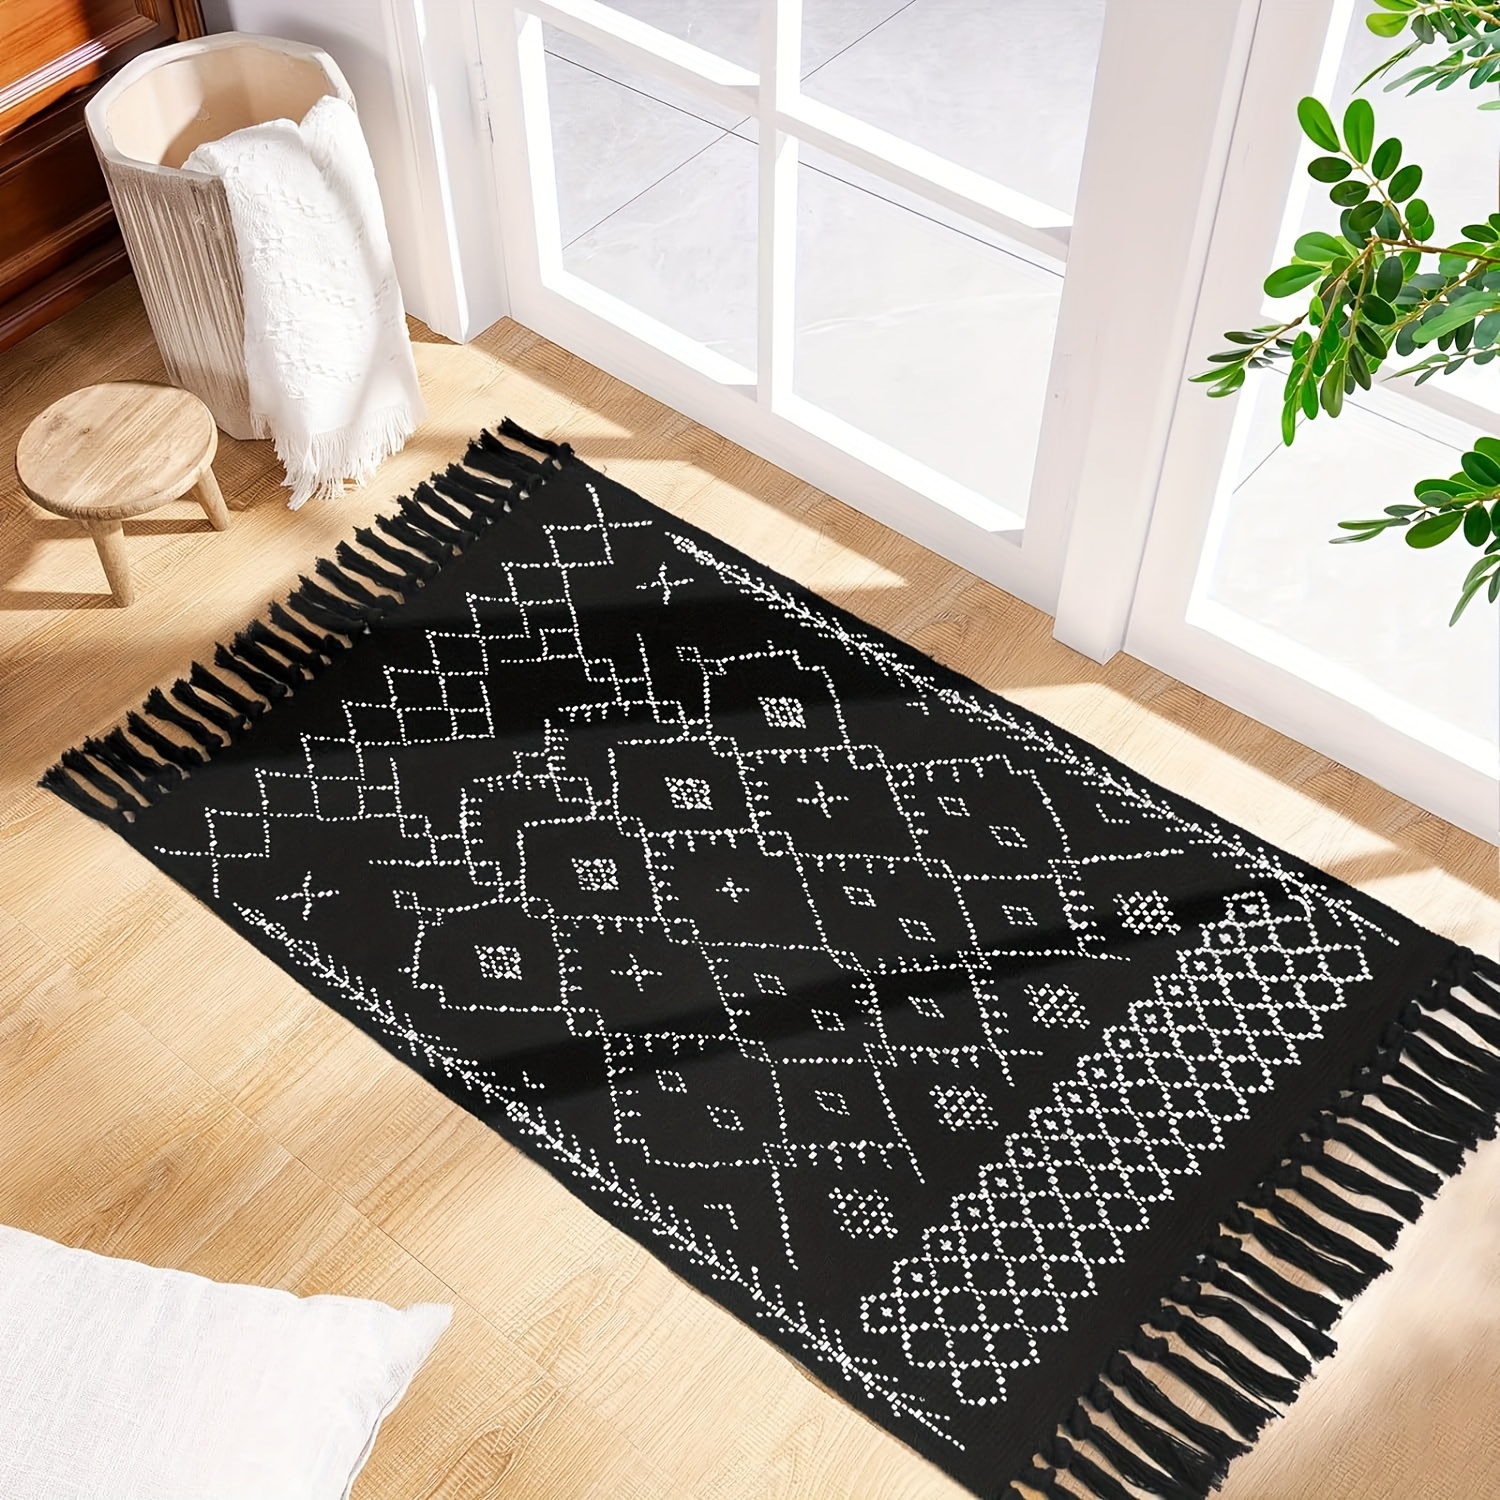 Bohemian Area Rug, Black and Cream White Geometric Runner Rug, 2 x 3 ft Cotton  Braided Rug with Tassels, Vintage Washable Rugs for Kitchen Floor Living  Laundry Room 